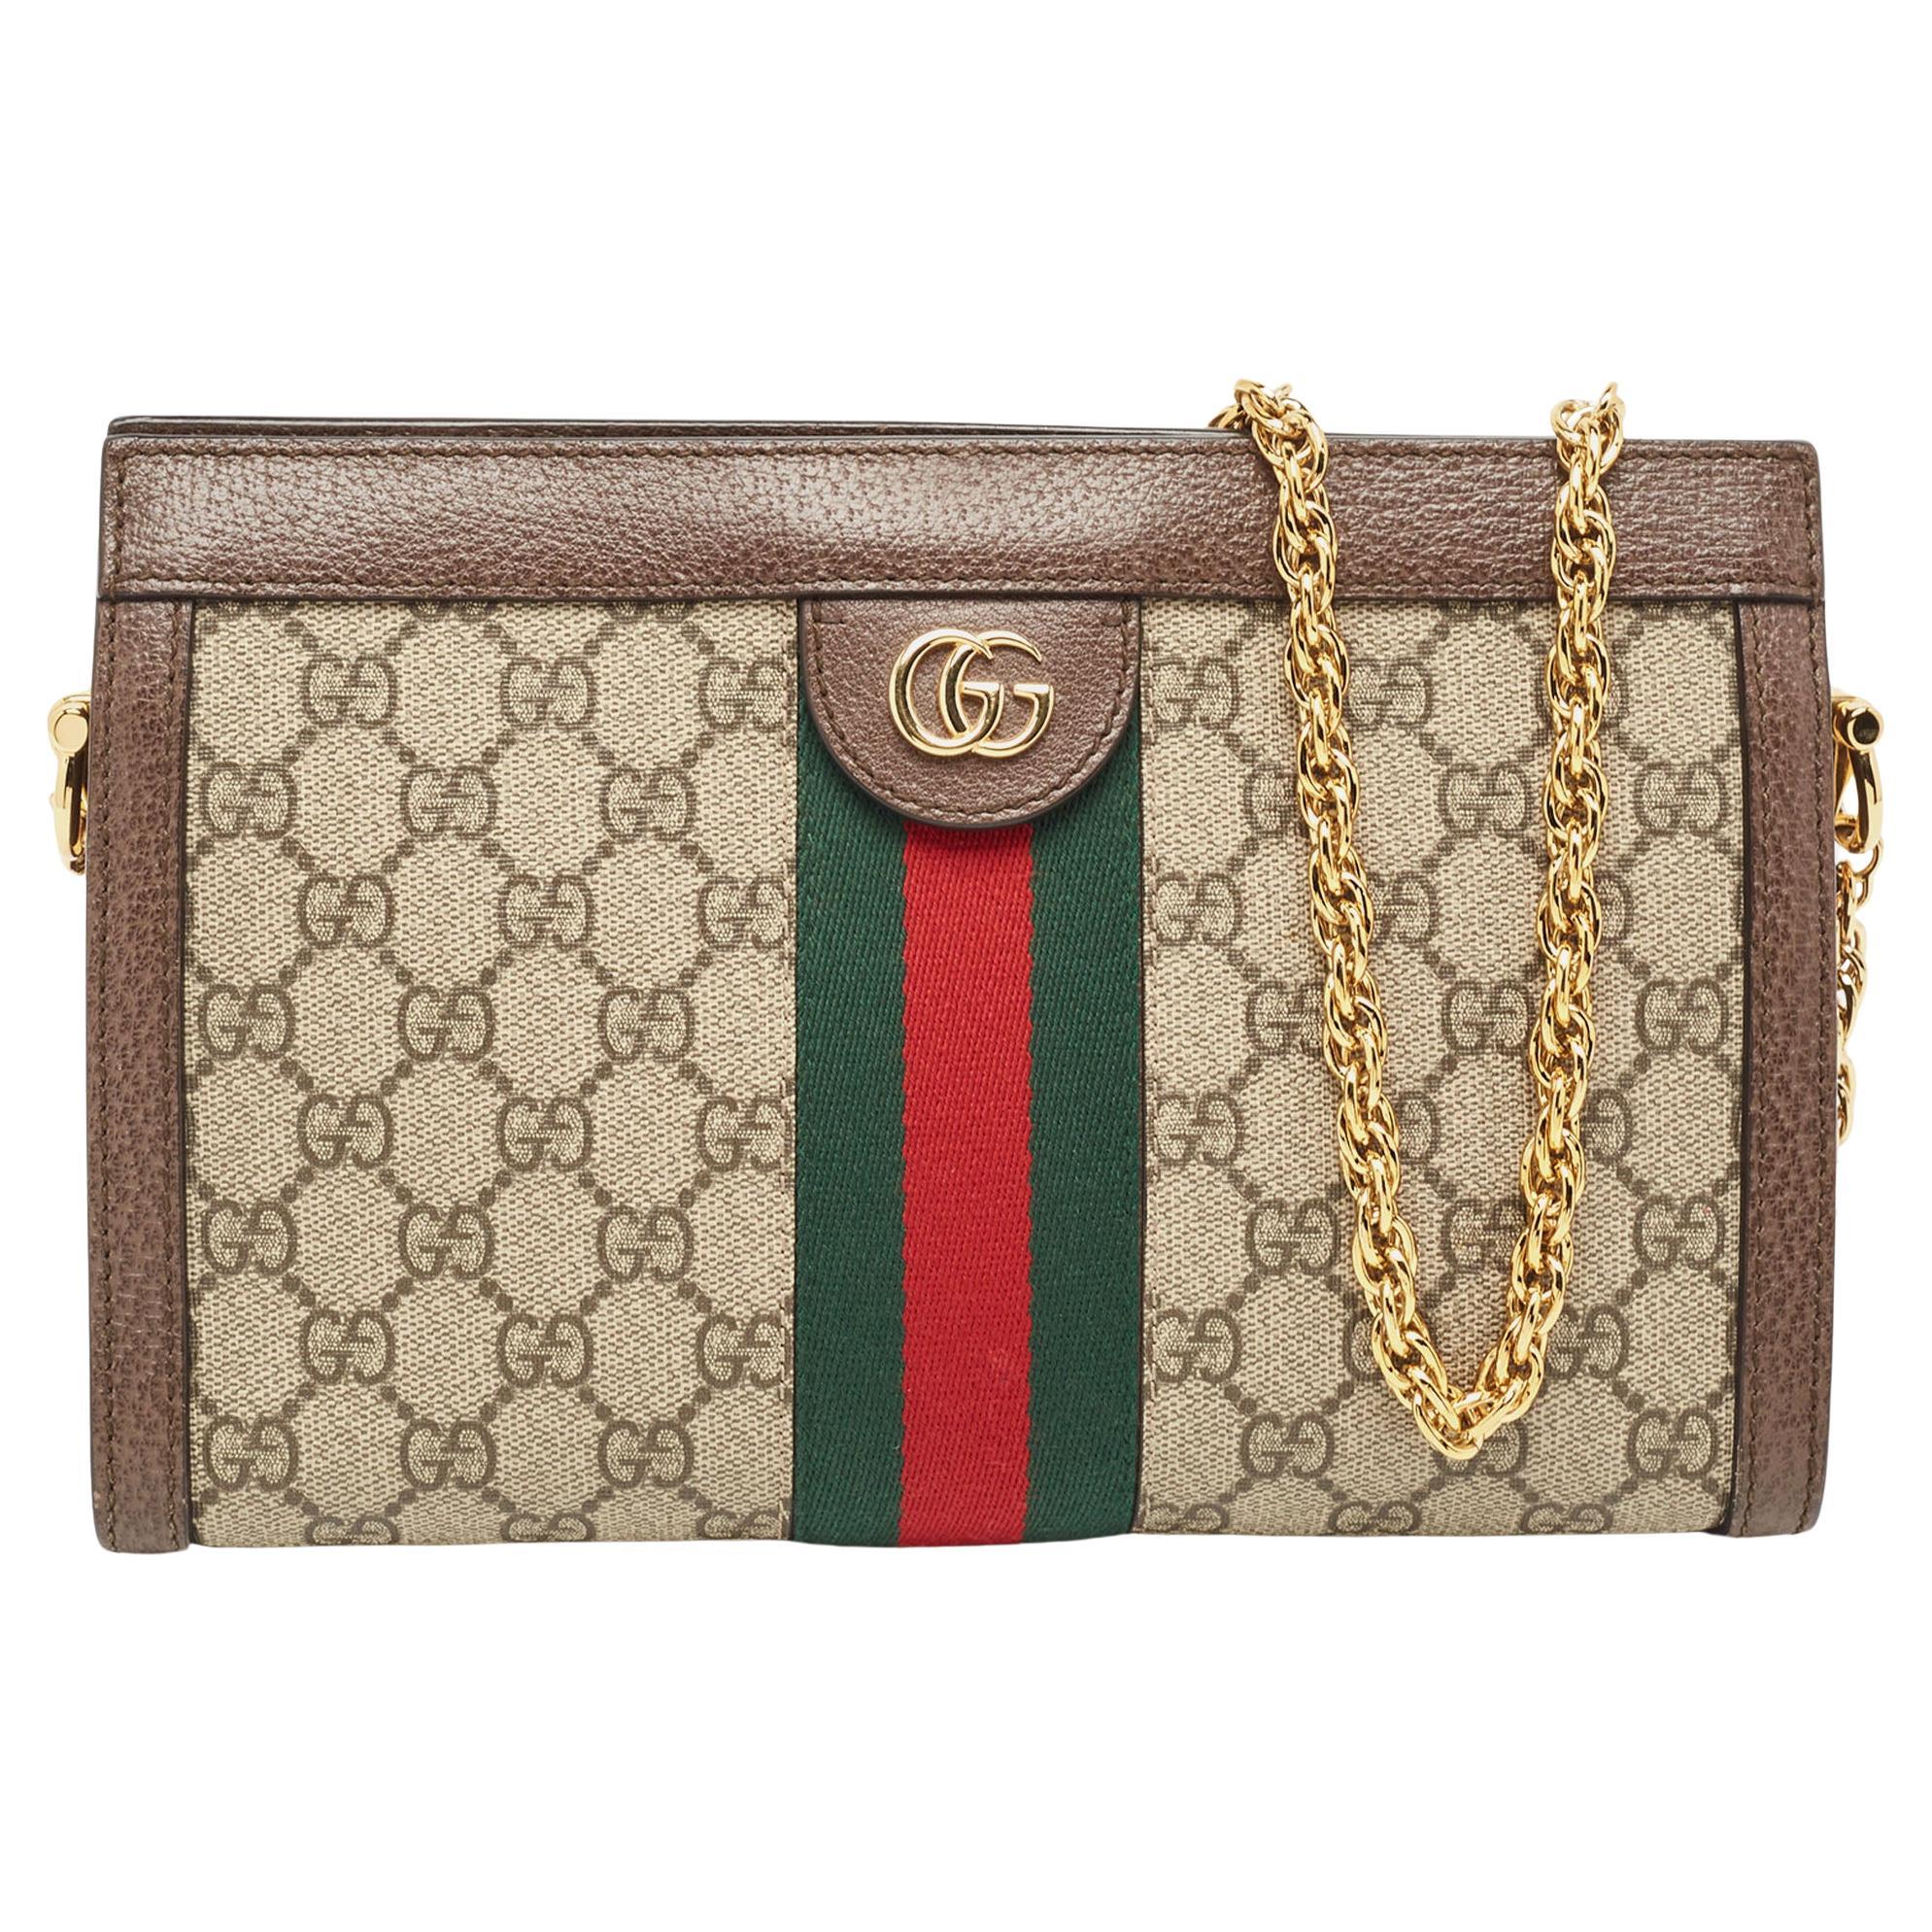 Gucci Brown/Beige GG Supreme Canvas Small Ophidia Shoulder Bag For Sale